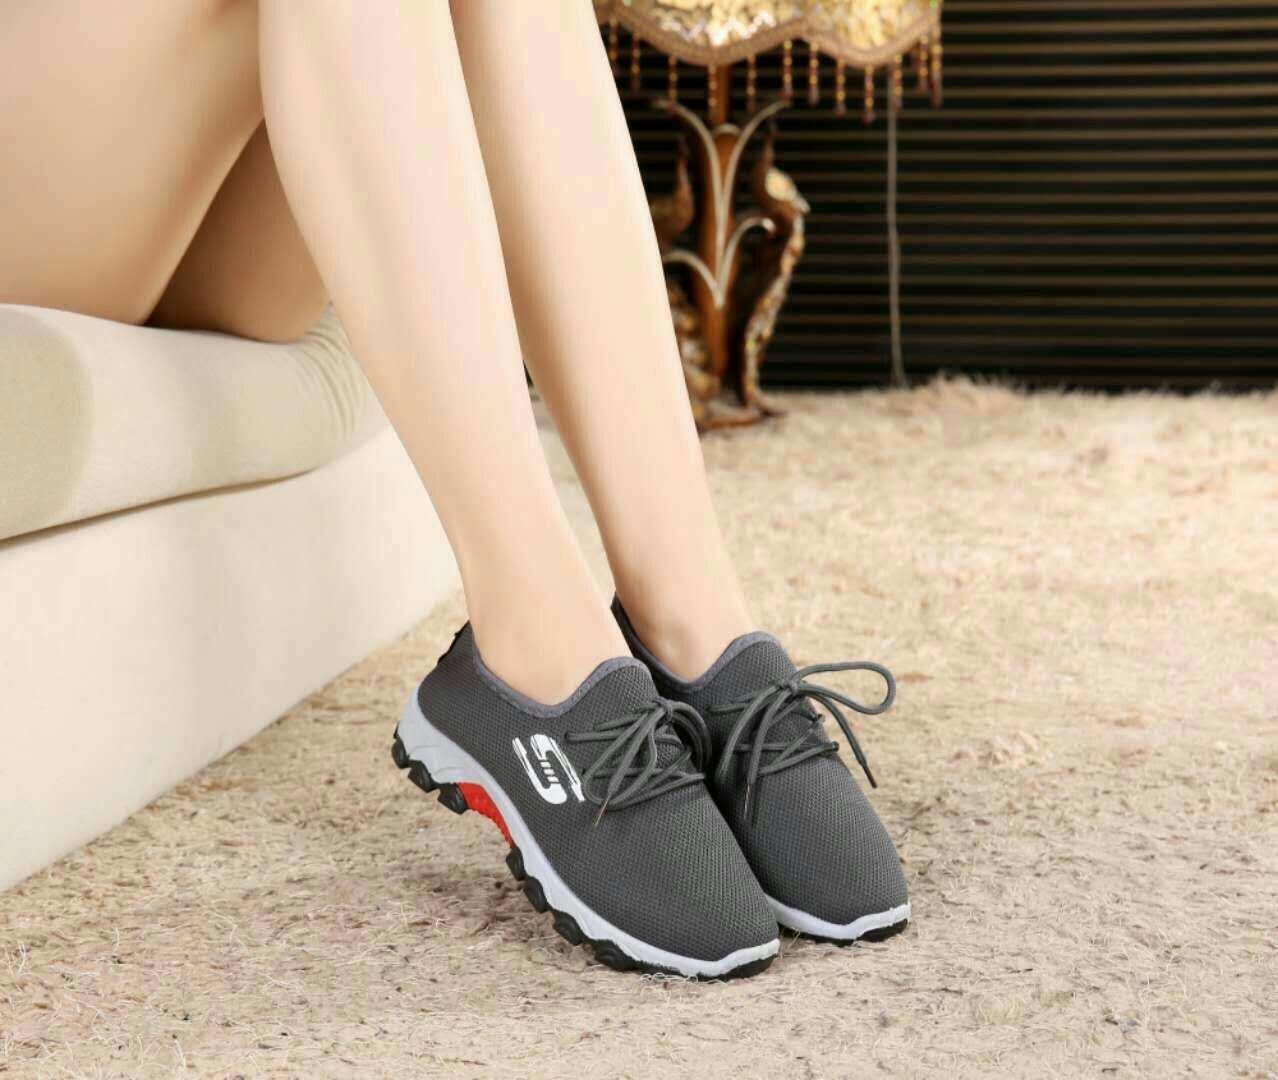 Shoes for Women for sale - Womens Fashion Shoes online ...